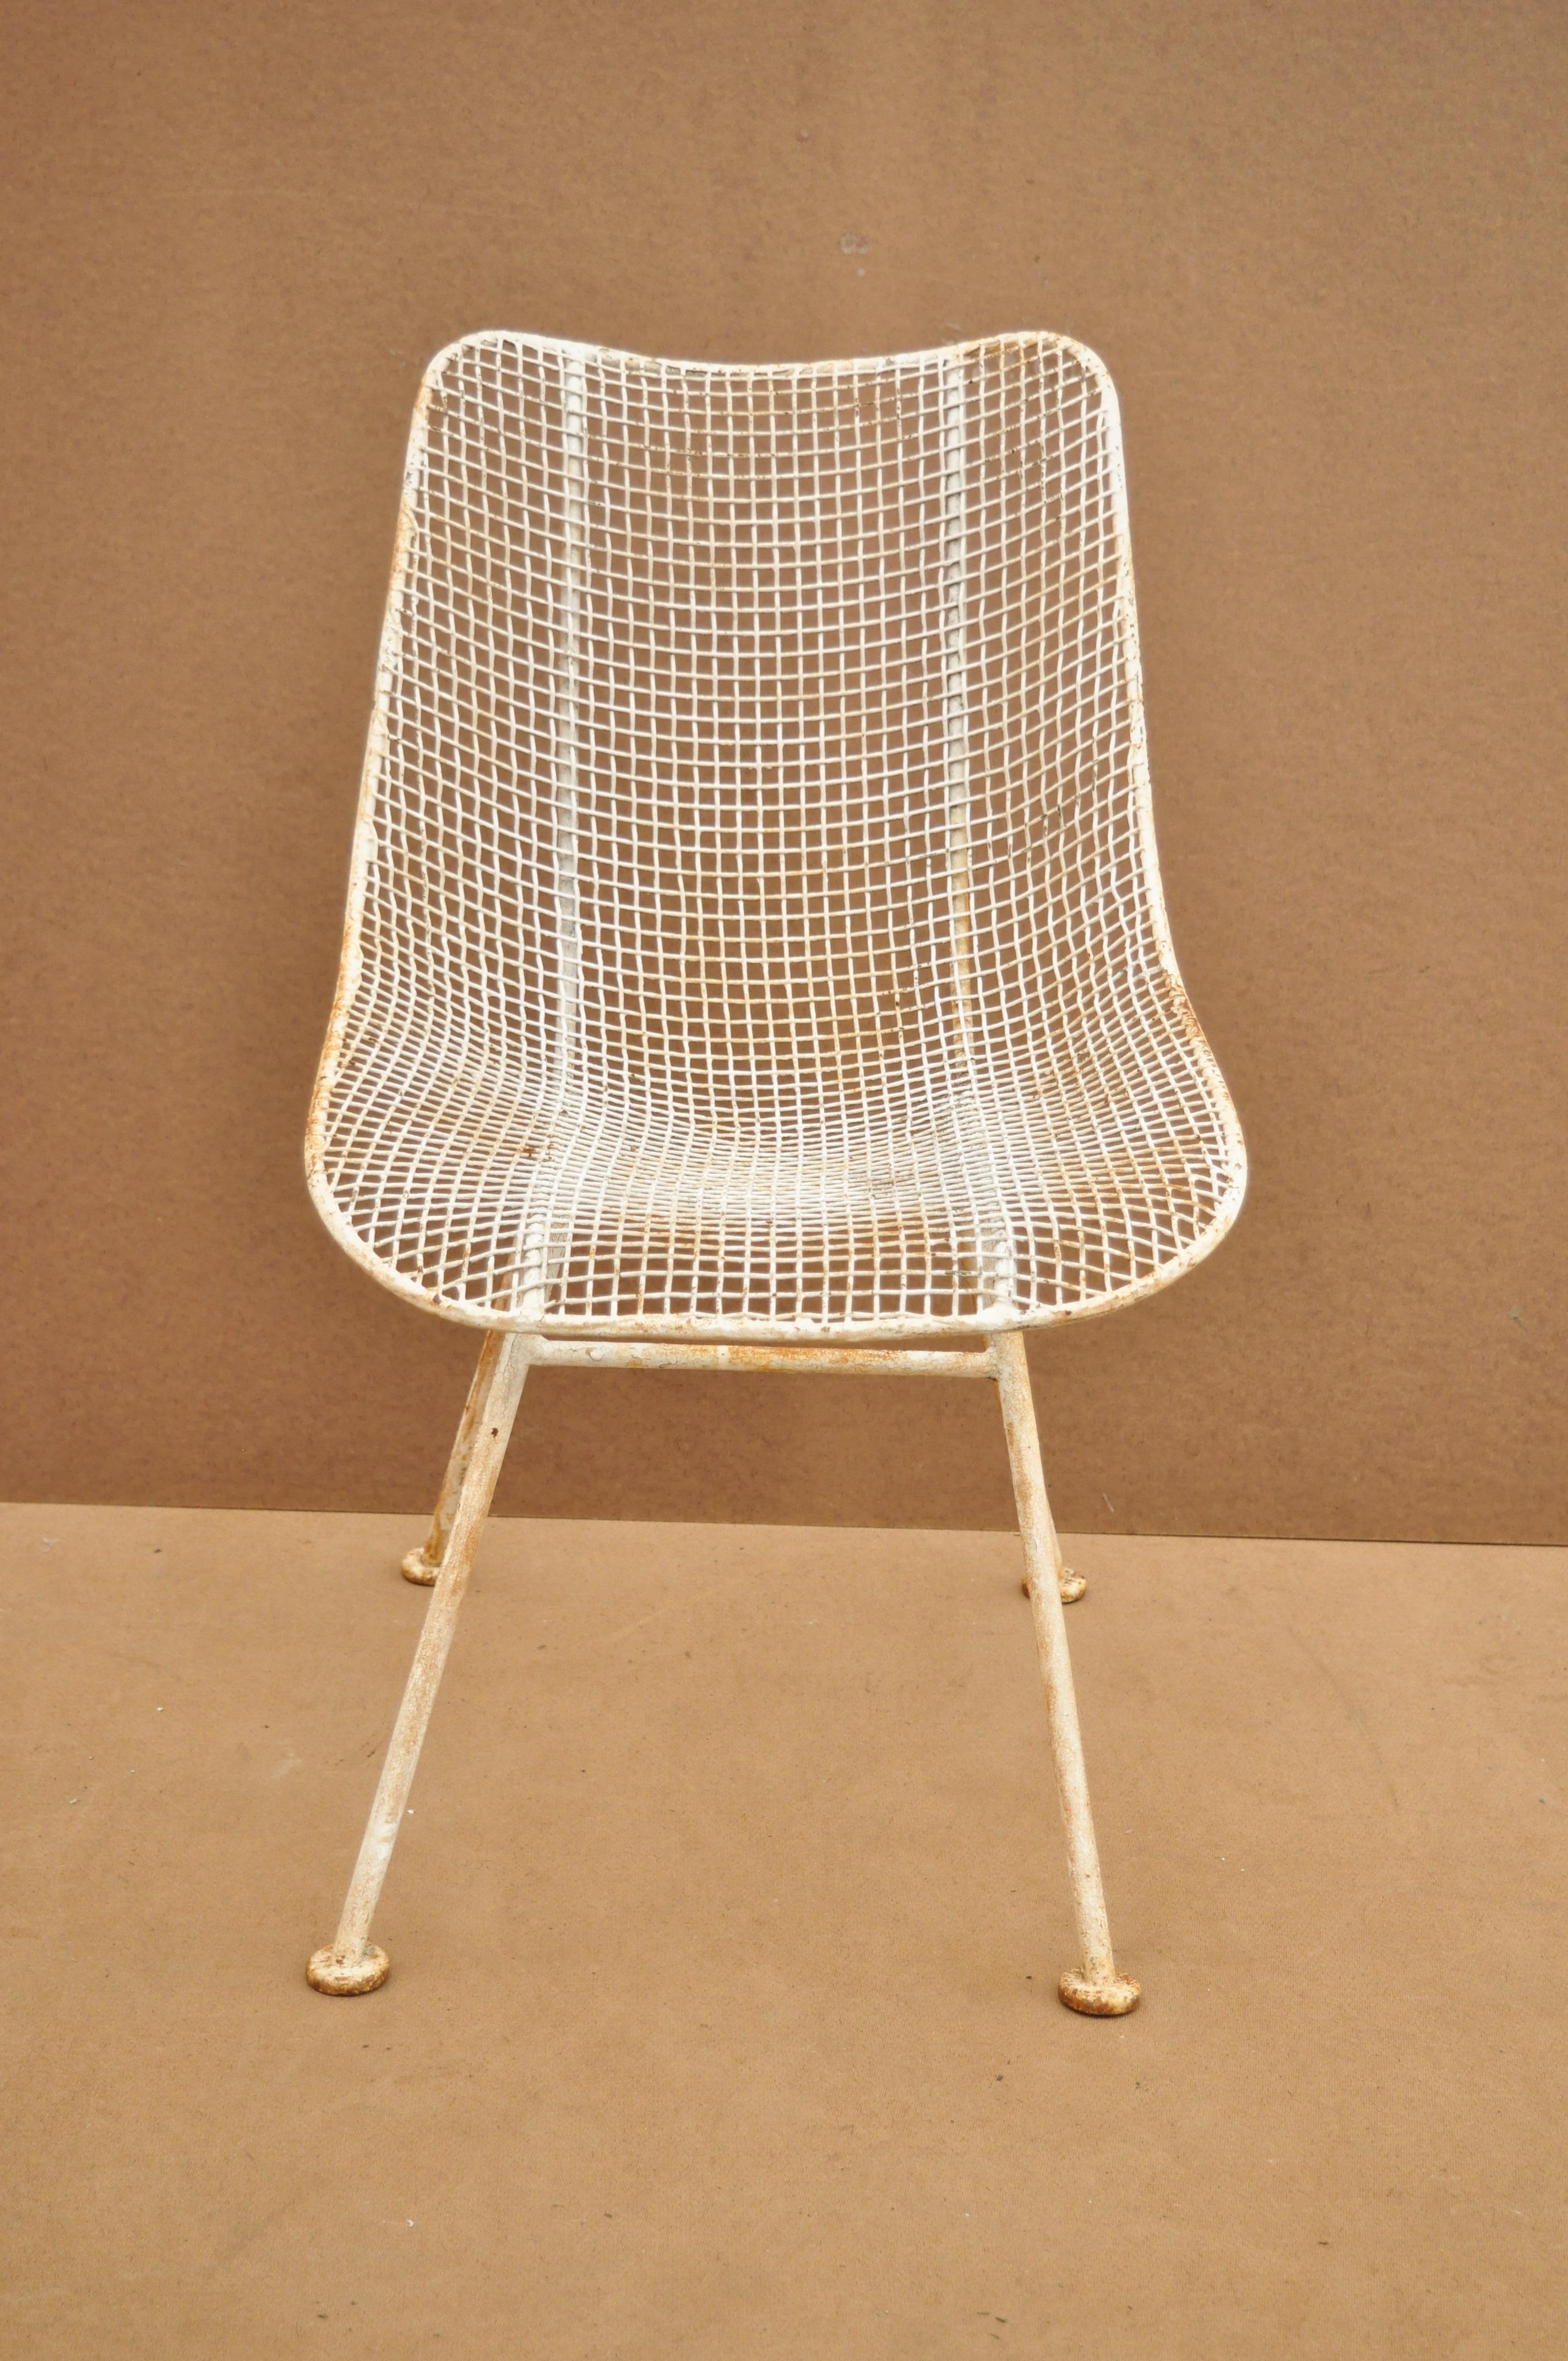 Vintage Russell Woodard sculpture metal mesh wrought iron dining side chair. Item features iron frame, metal mesh seats, iconic Mid-Century Modern design, very nice vintage item, circa 1950. Measurements: 32